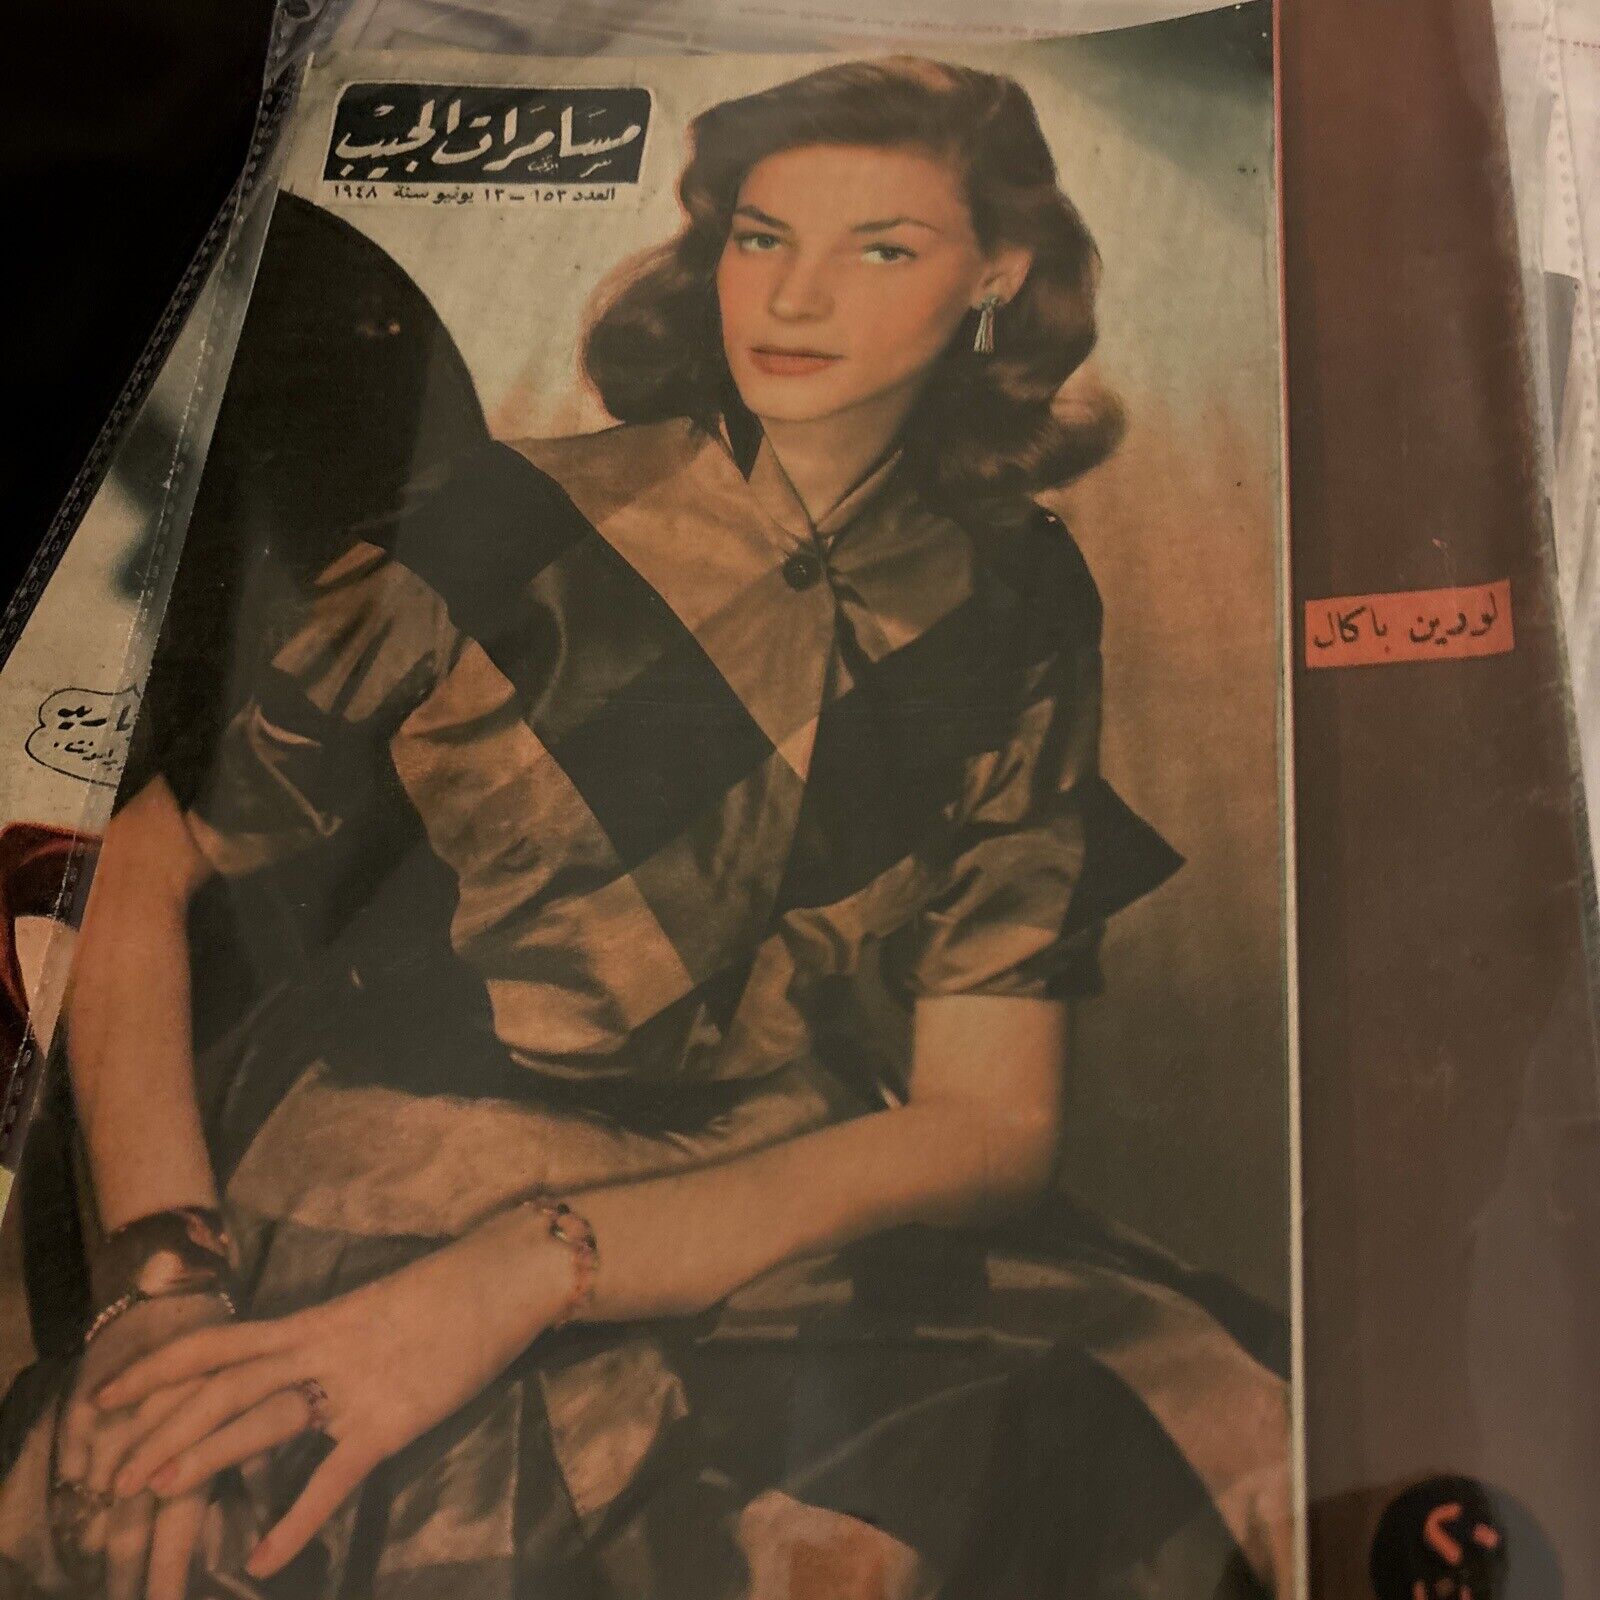 1949 Arabic Magazine Actress Lauren Bacall Cover Scarce Hollywood